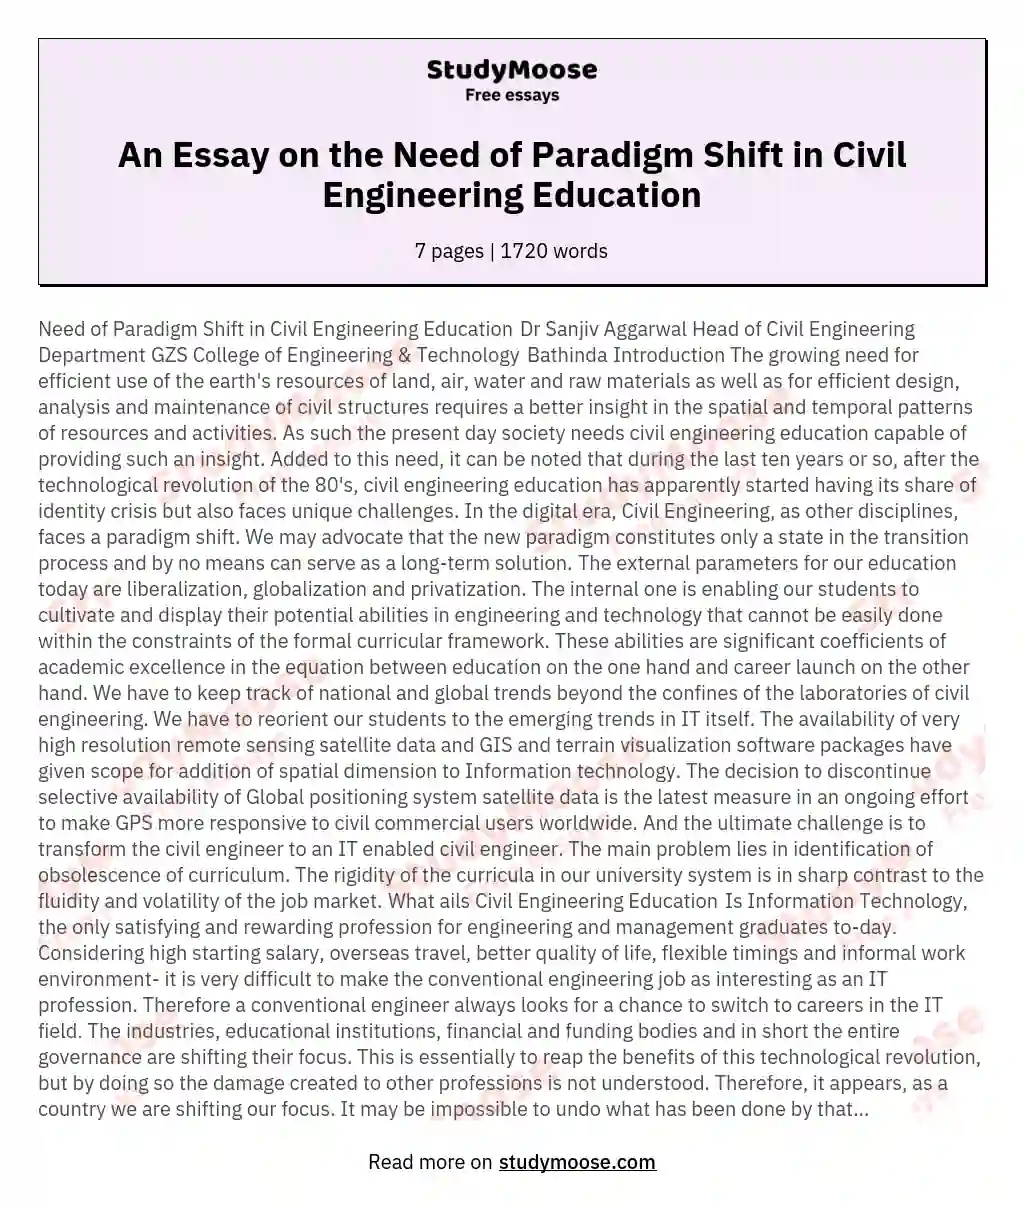 An Essay on the Need of Paradigm Shift in Civil Engineering Education essay